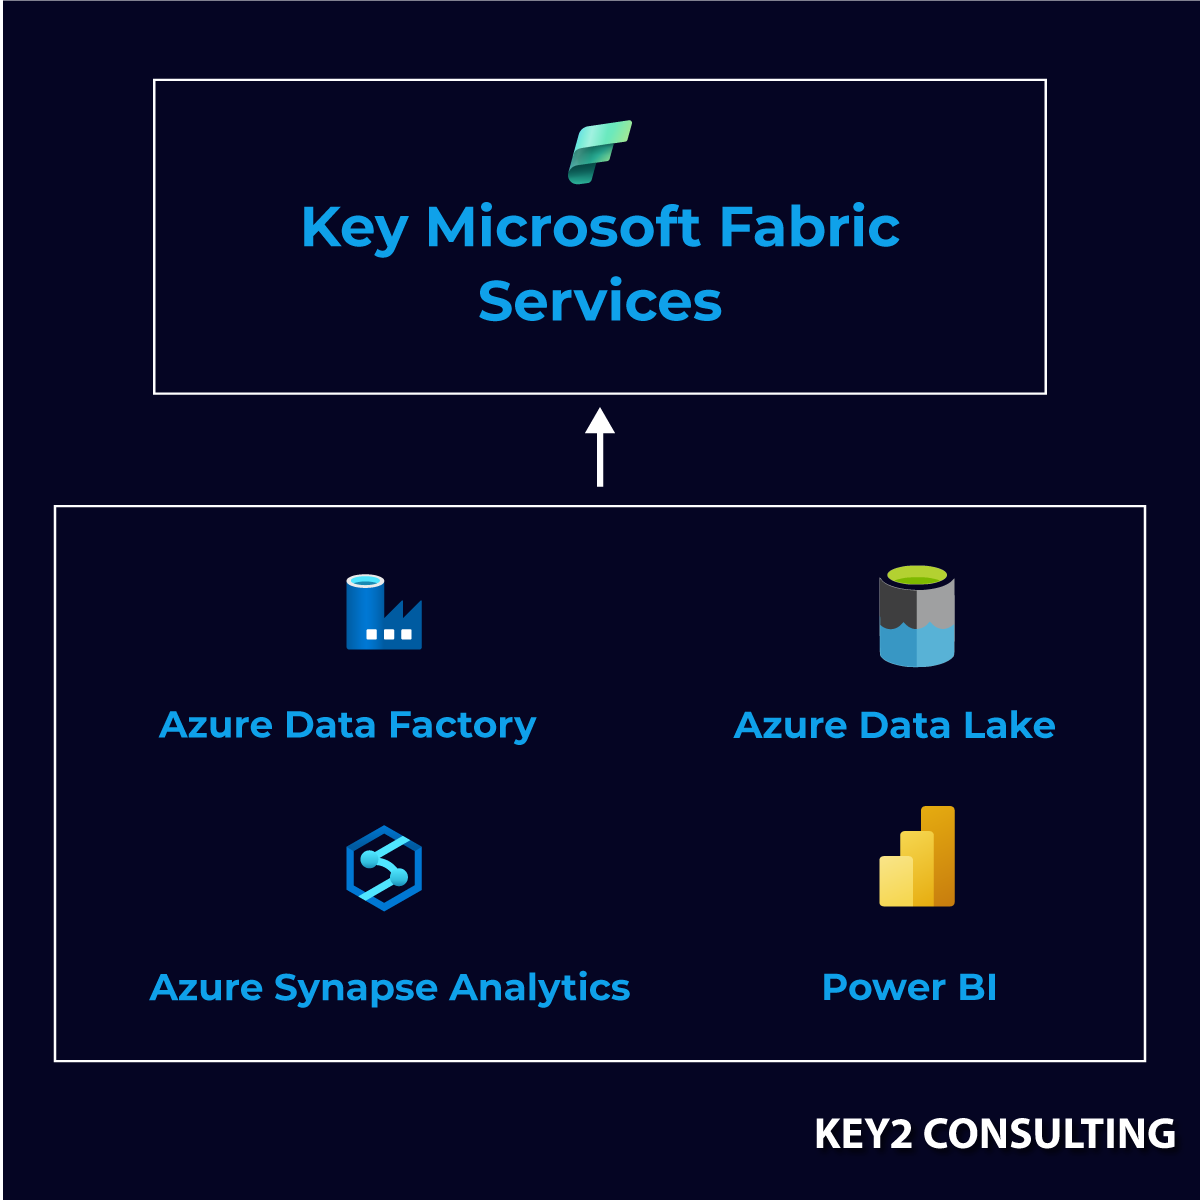 The services of Microsoft Fabric include Azure Data Factory, Azure Data Lake, Azure Synapse Analytics, and Power BI